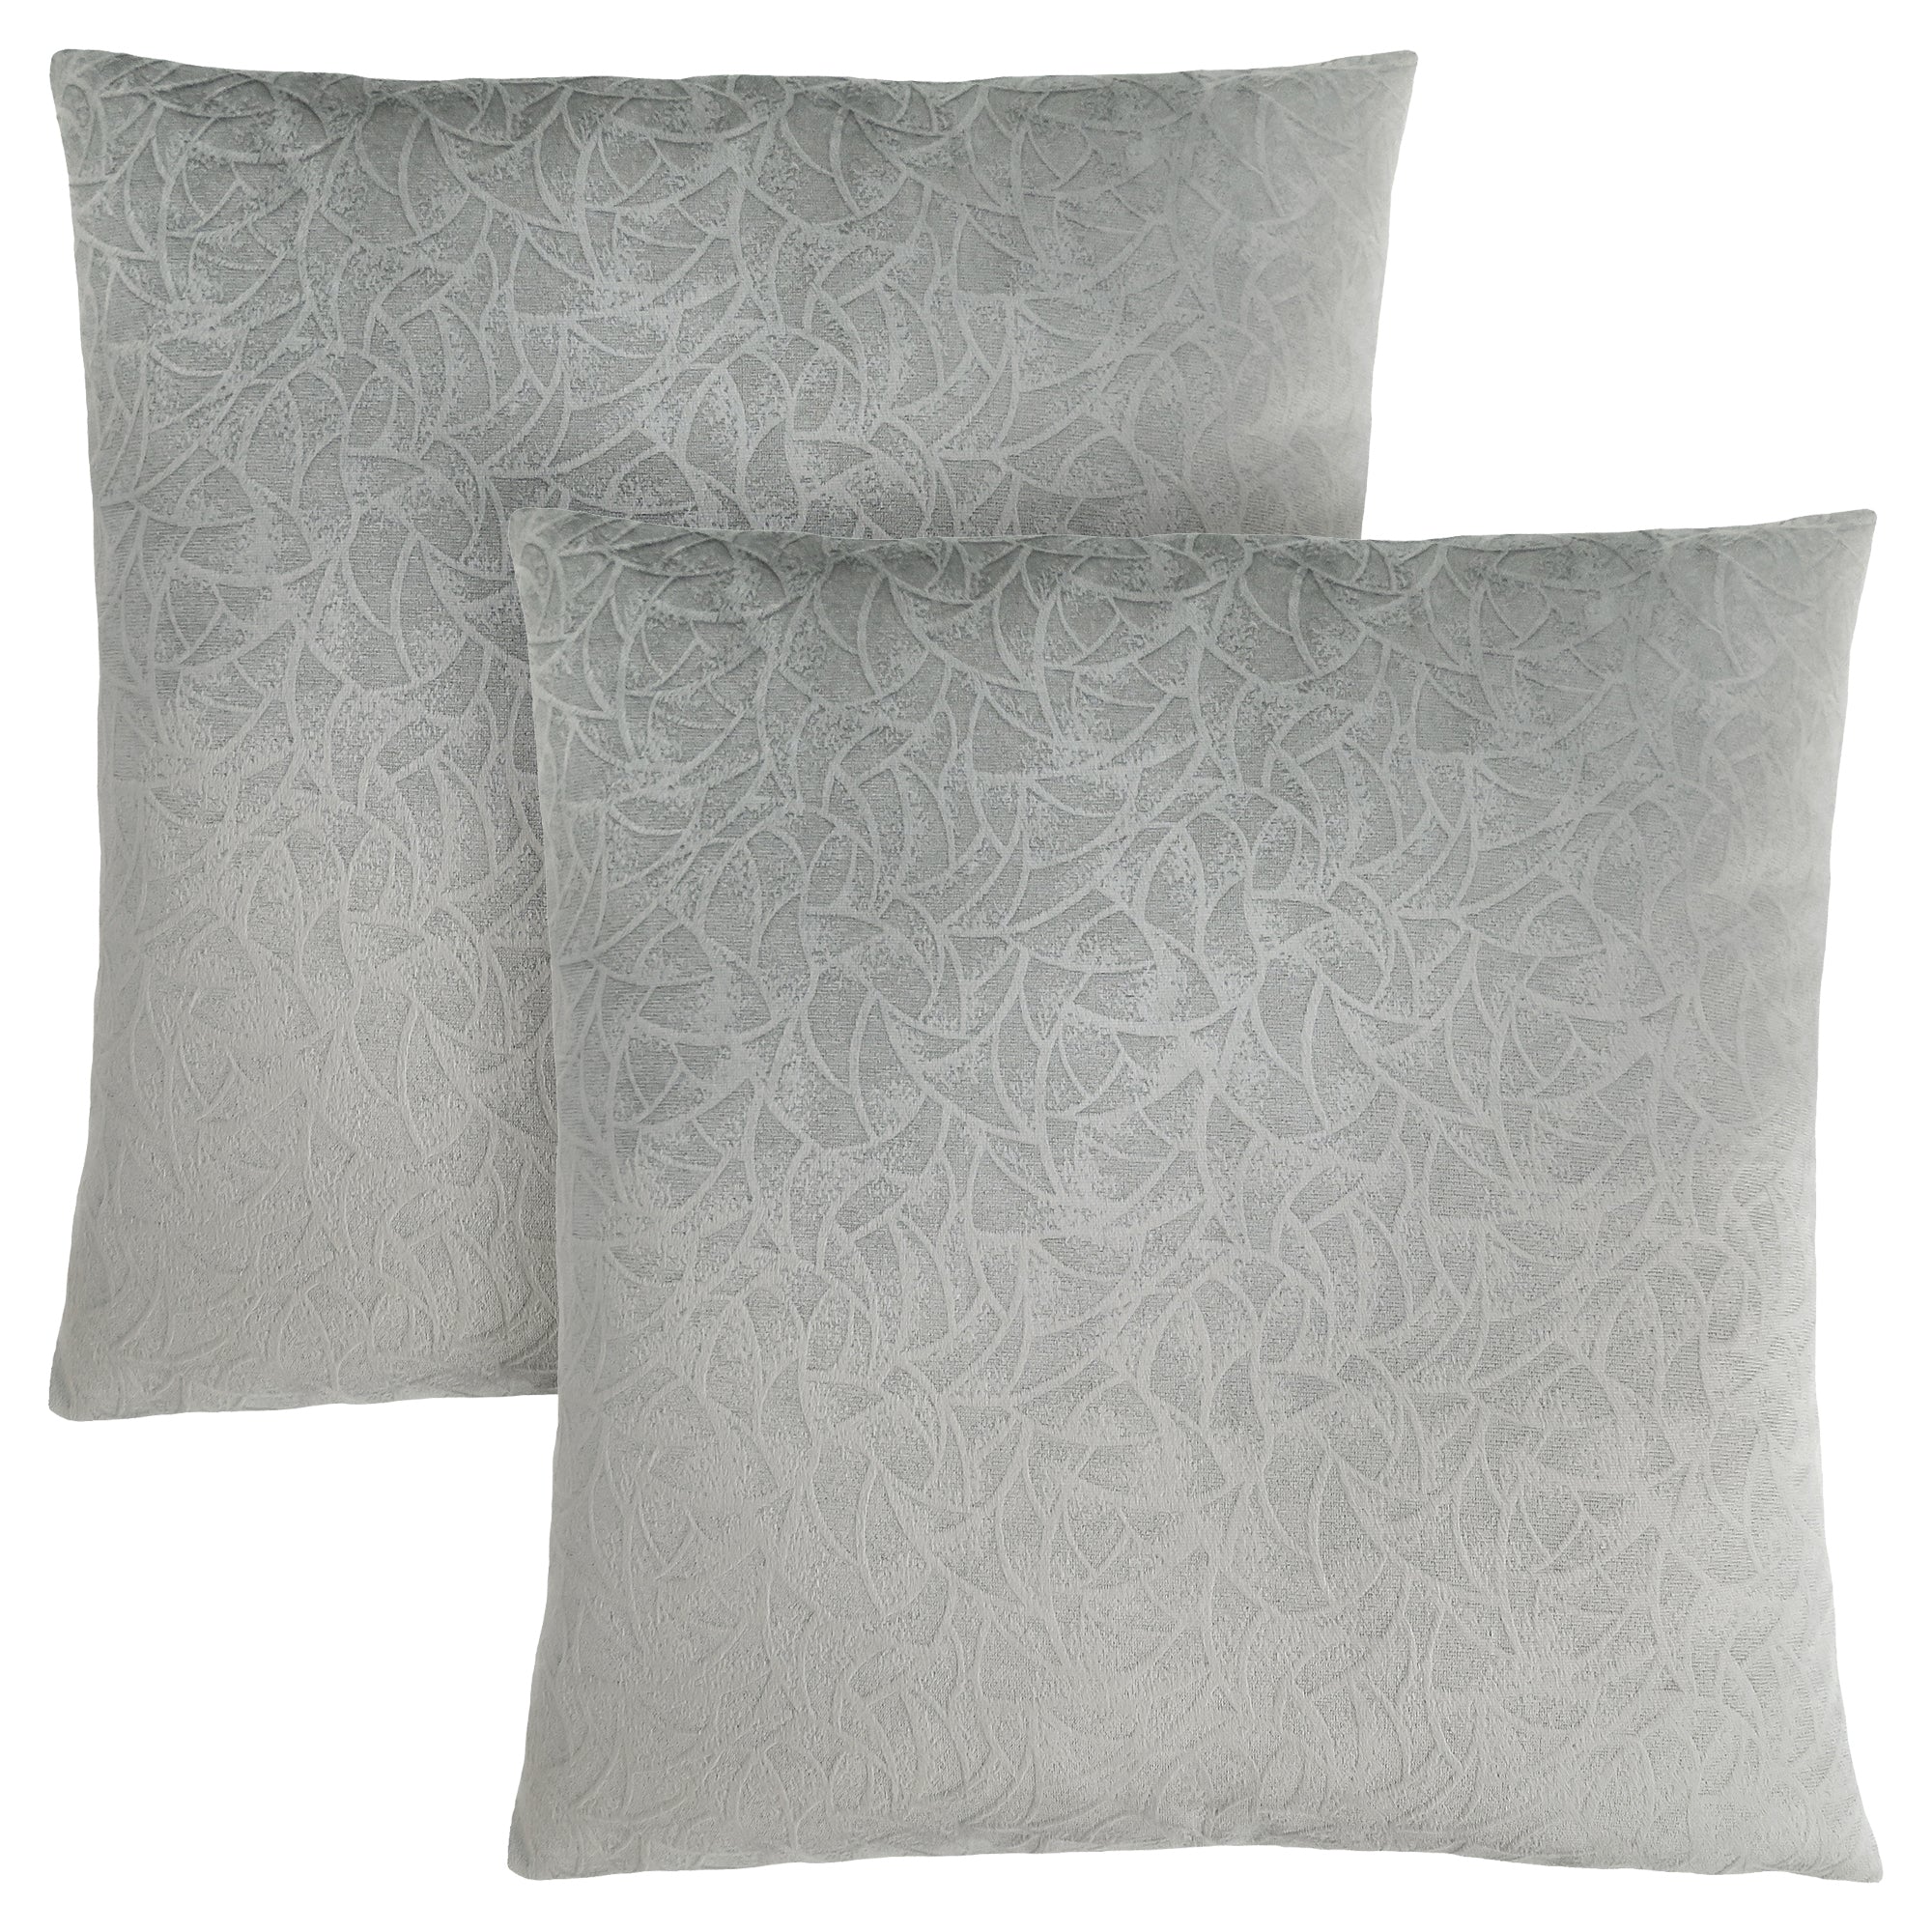 MN-589257    Pillows, Set Of 2, 18 X 18 Square, Insert Included, Decorative Throw, Accent, Sofa, Couch, Bed, Soft Polyester Woven Fabric, Hypoallergenic Soft Polyester Insert, Light Grey, Transitional